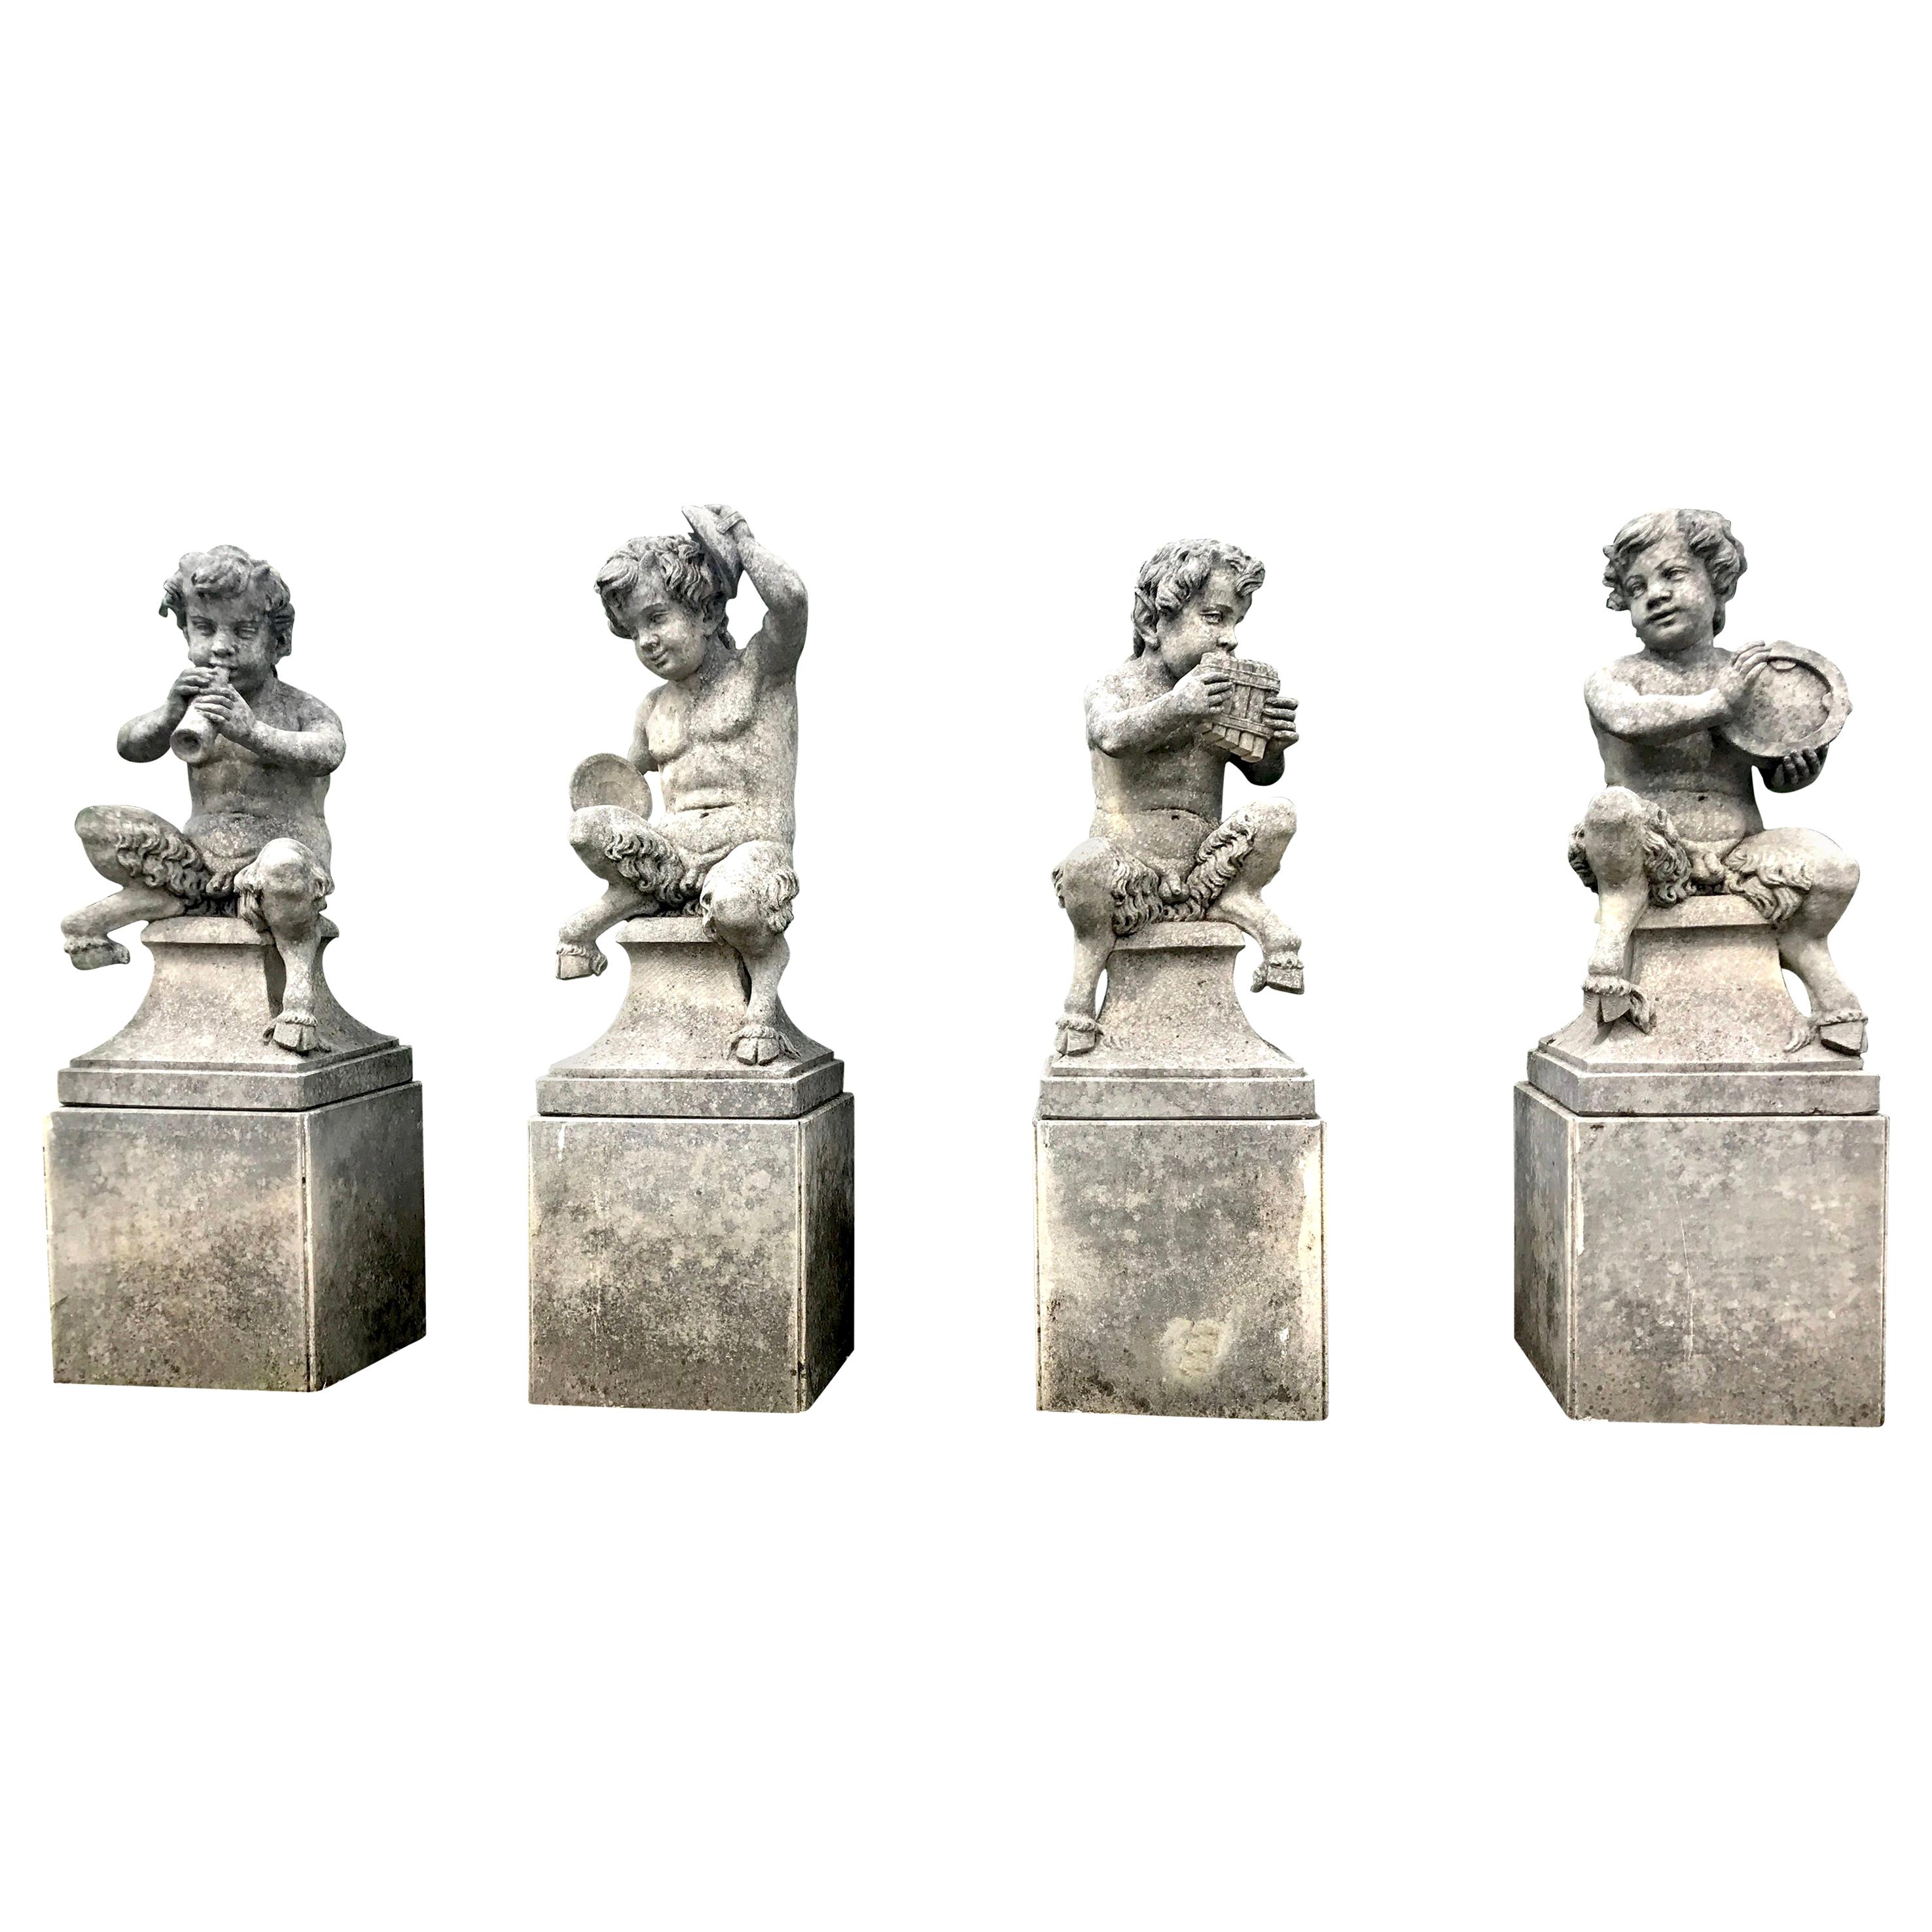 Four Italian Fauns Stone Garden Statues Representing Musicians For Sale